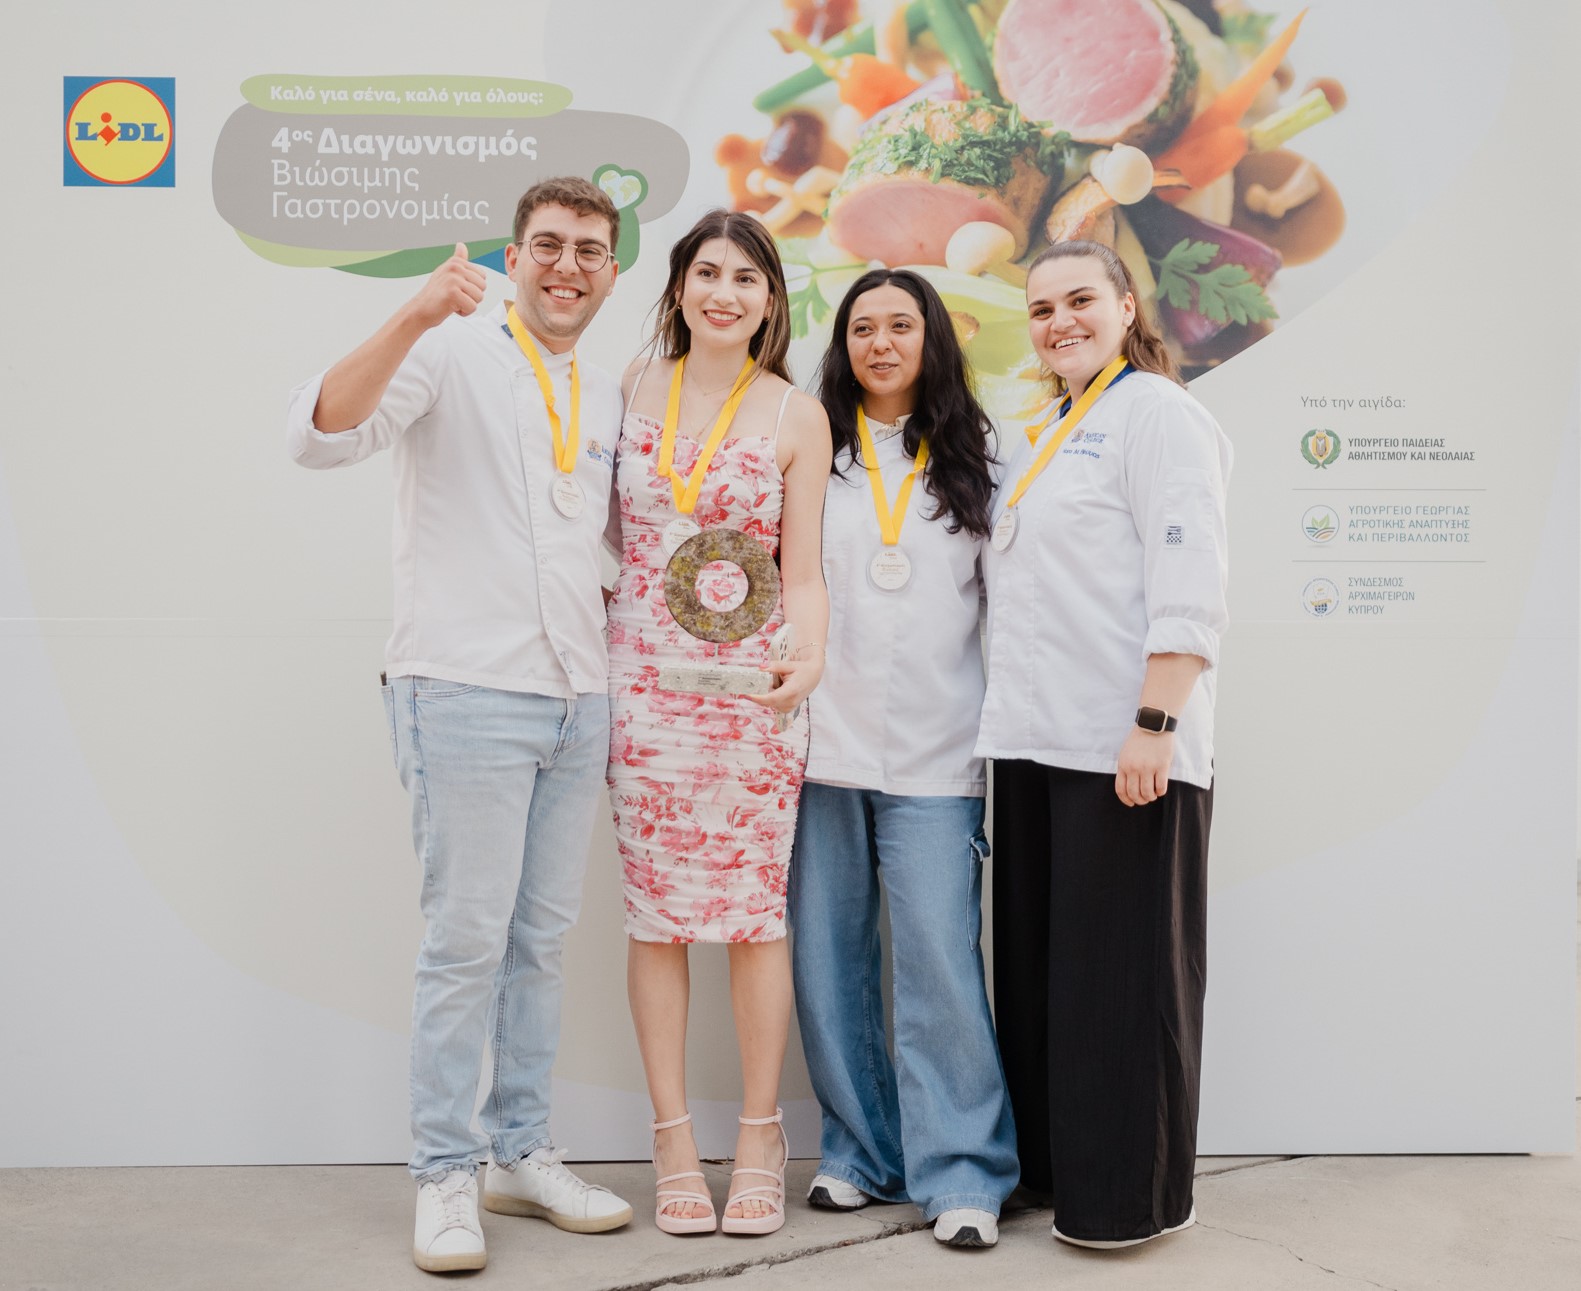 image Lidl Cyprus celebrates the successful completion of the 4th Sustainable Gastronomy Competition